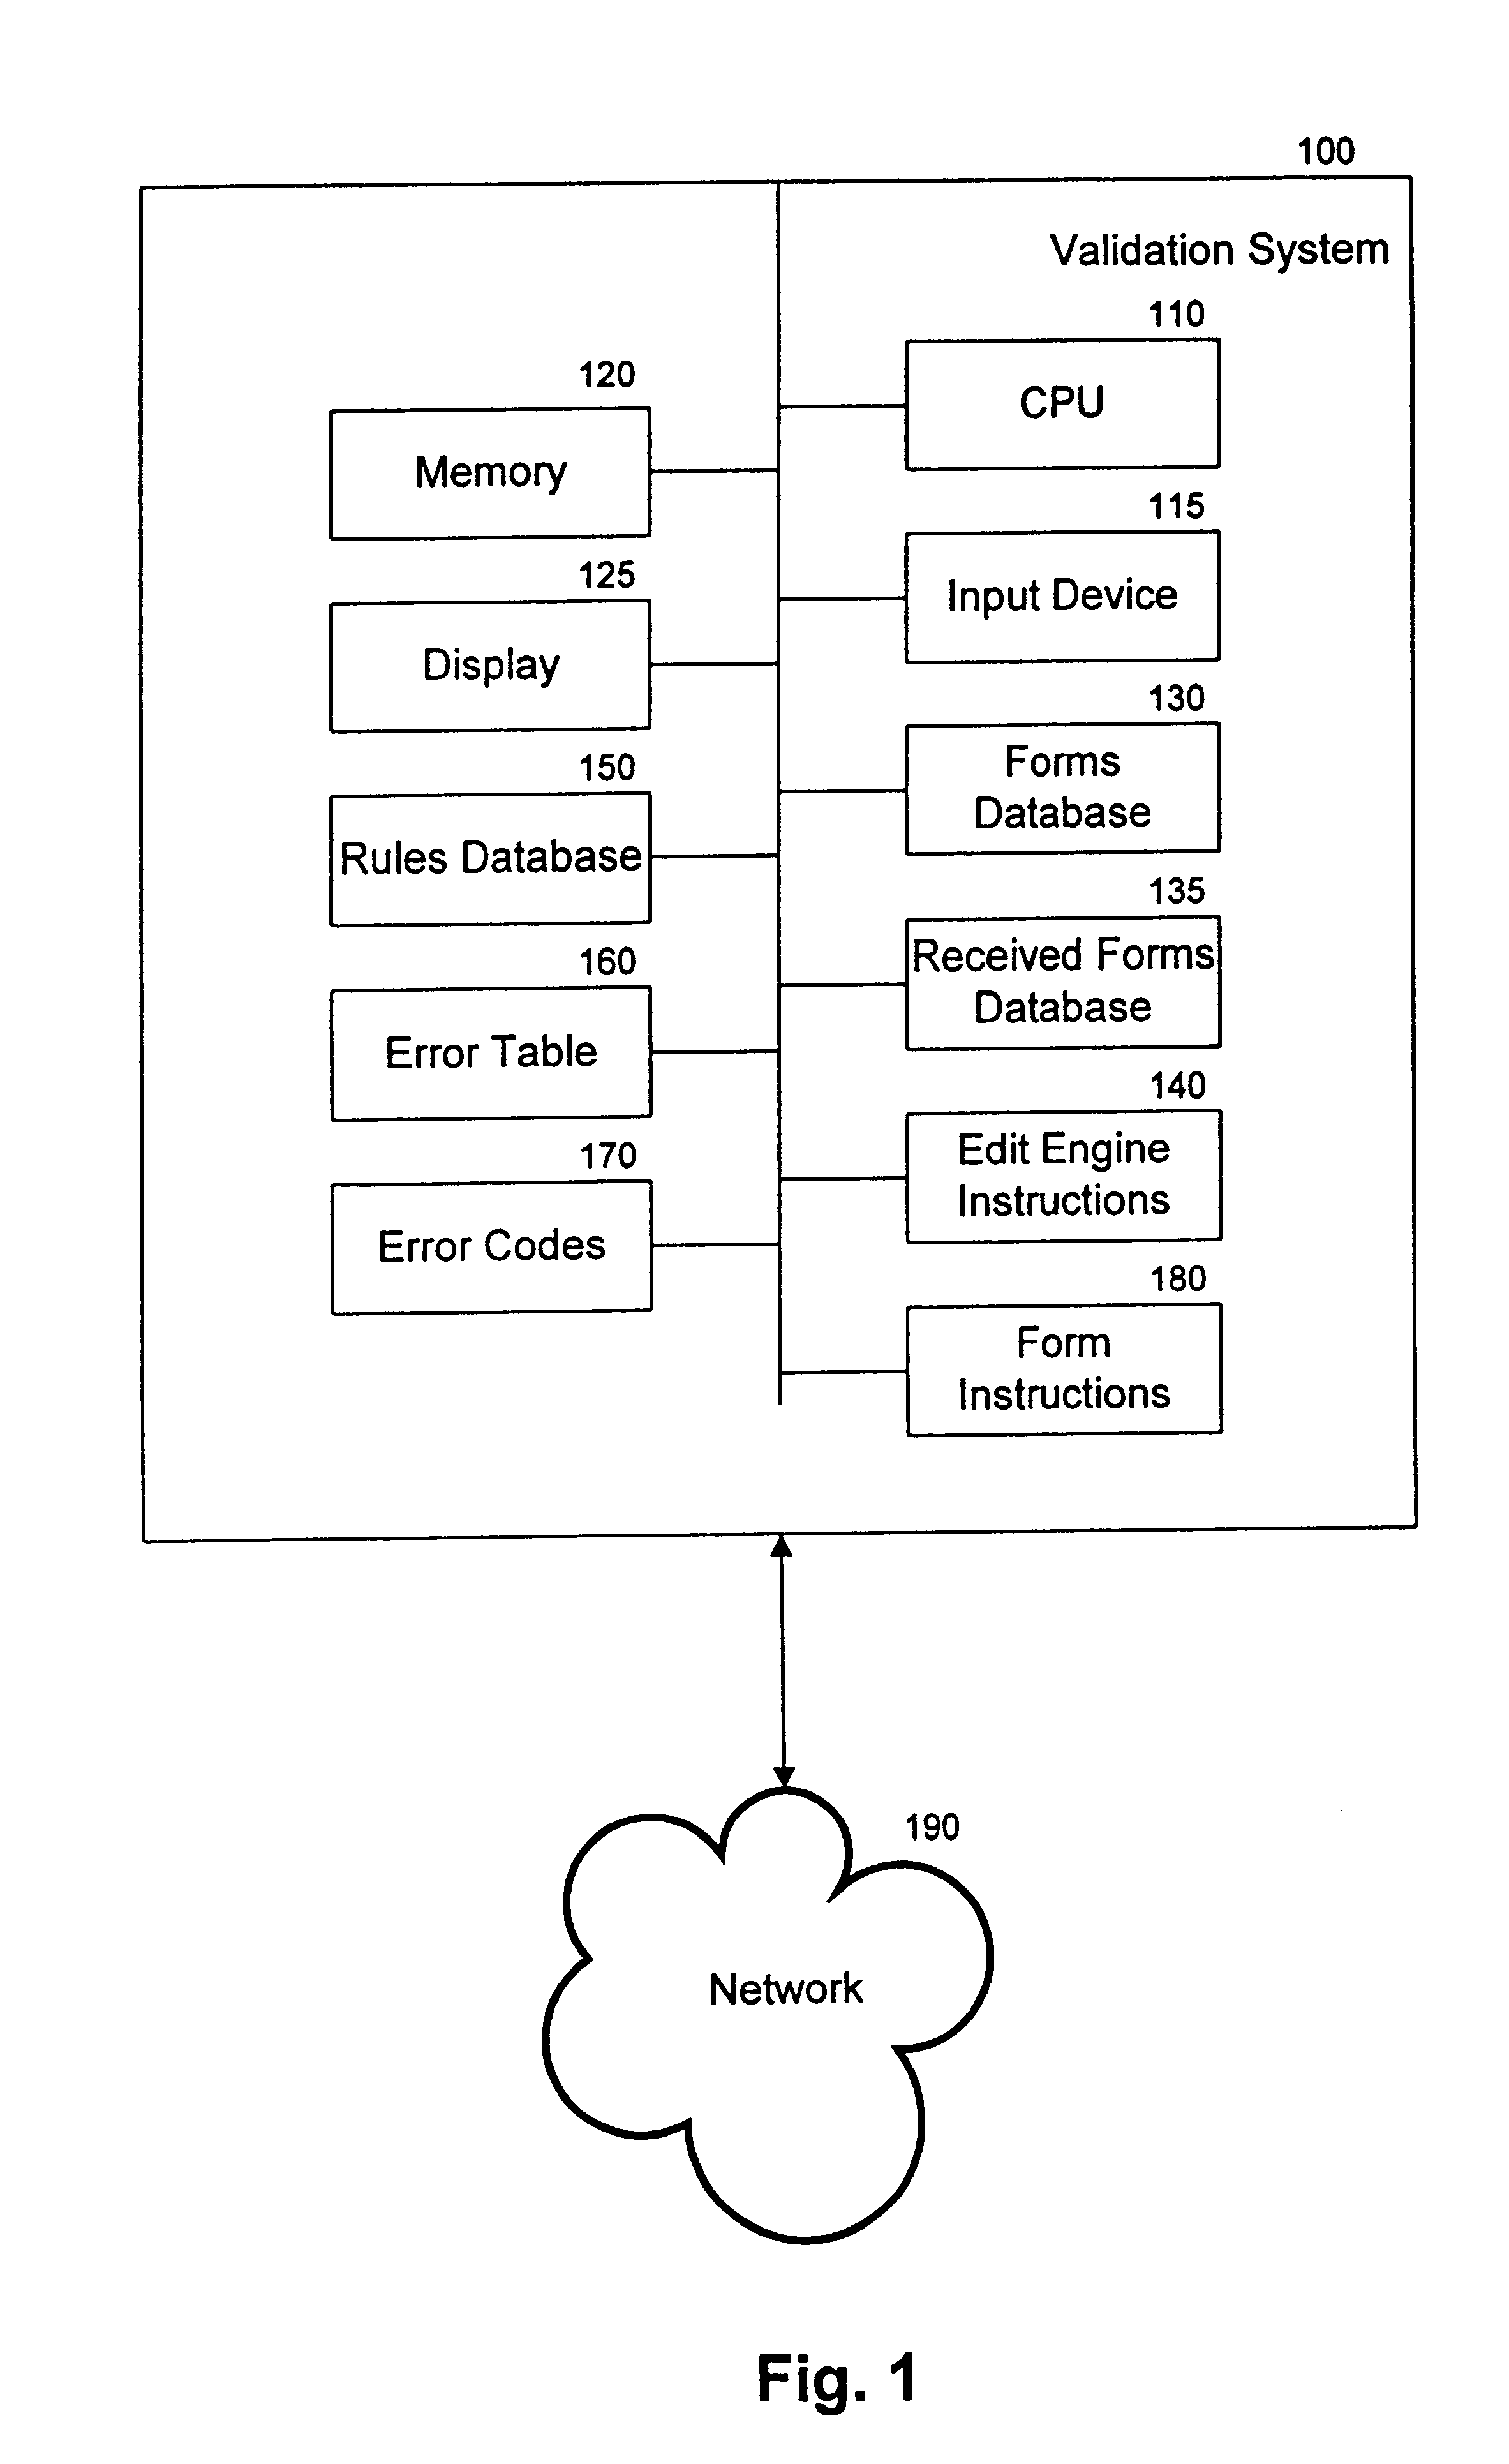 Parallel rule-based processing of forms